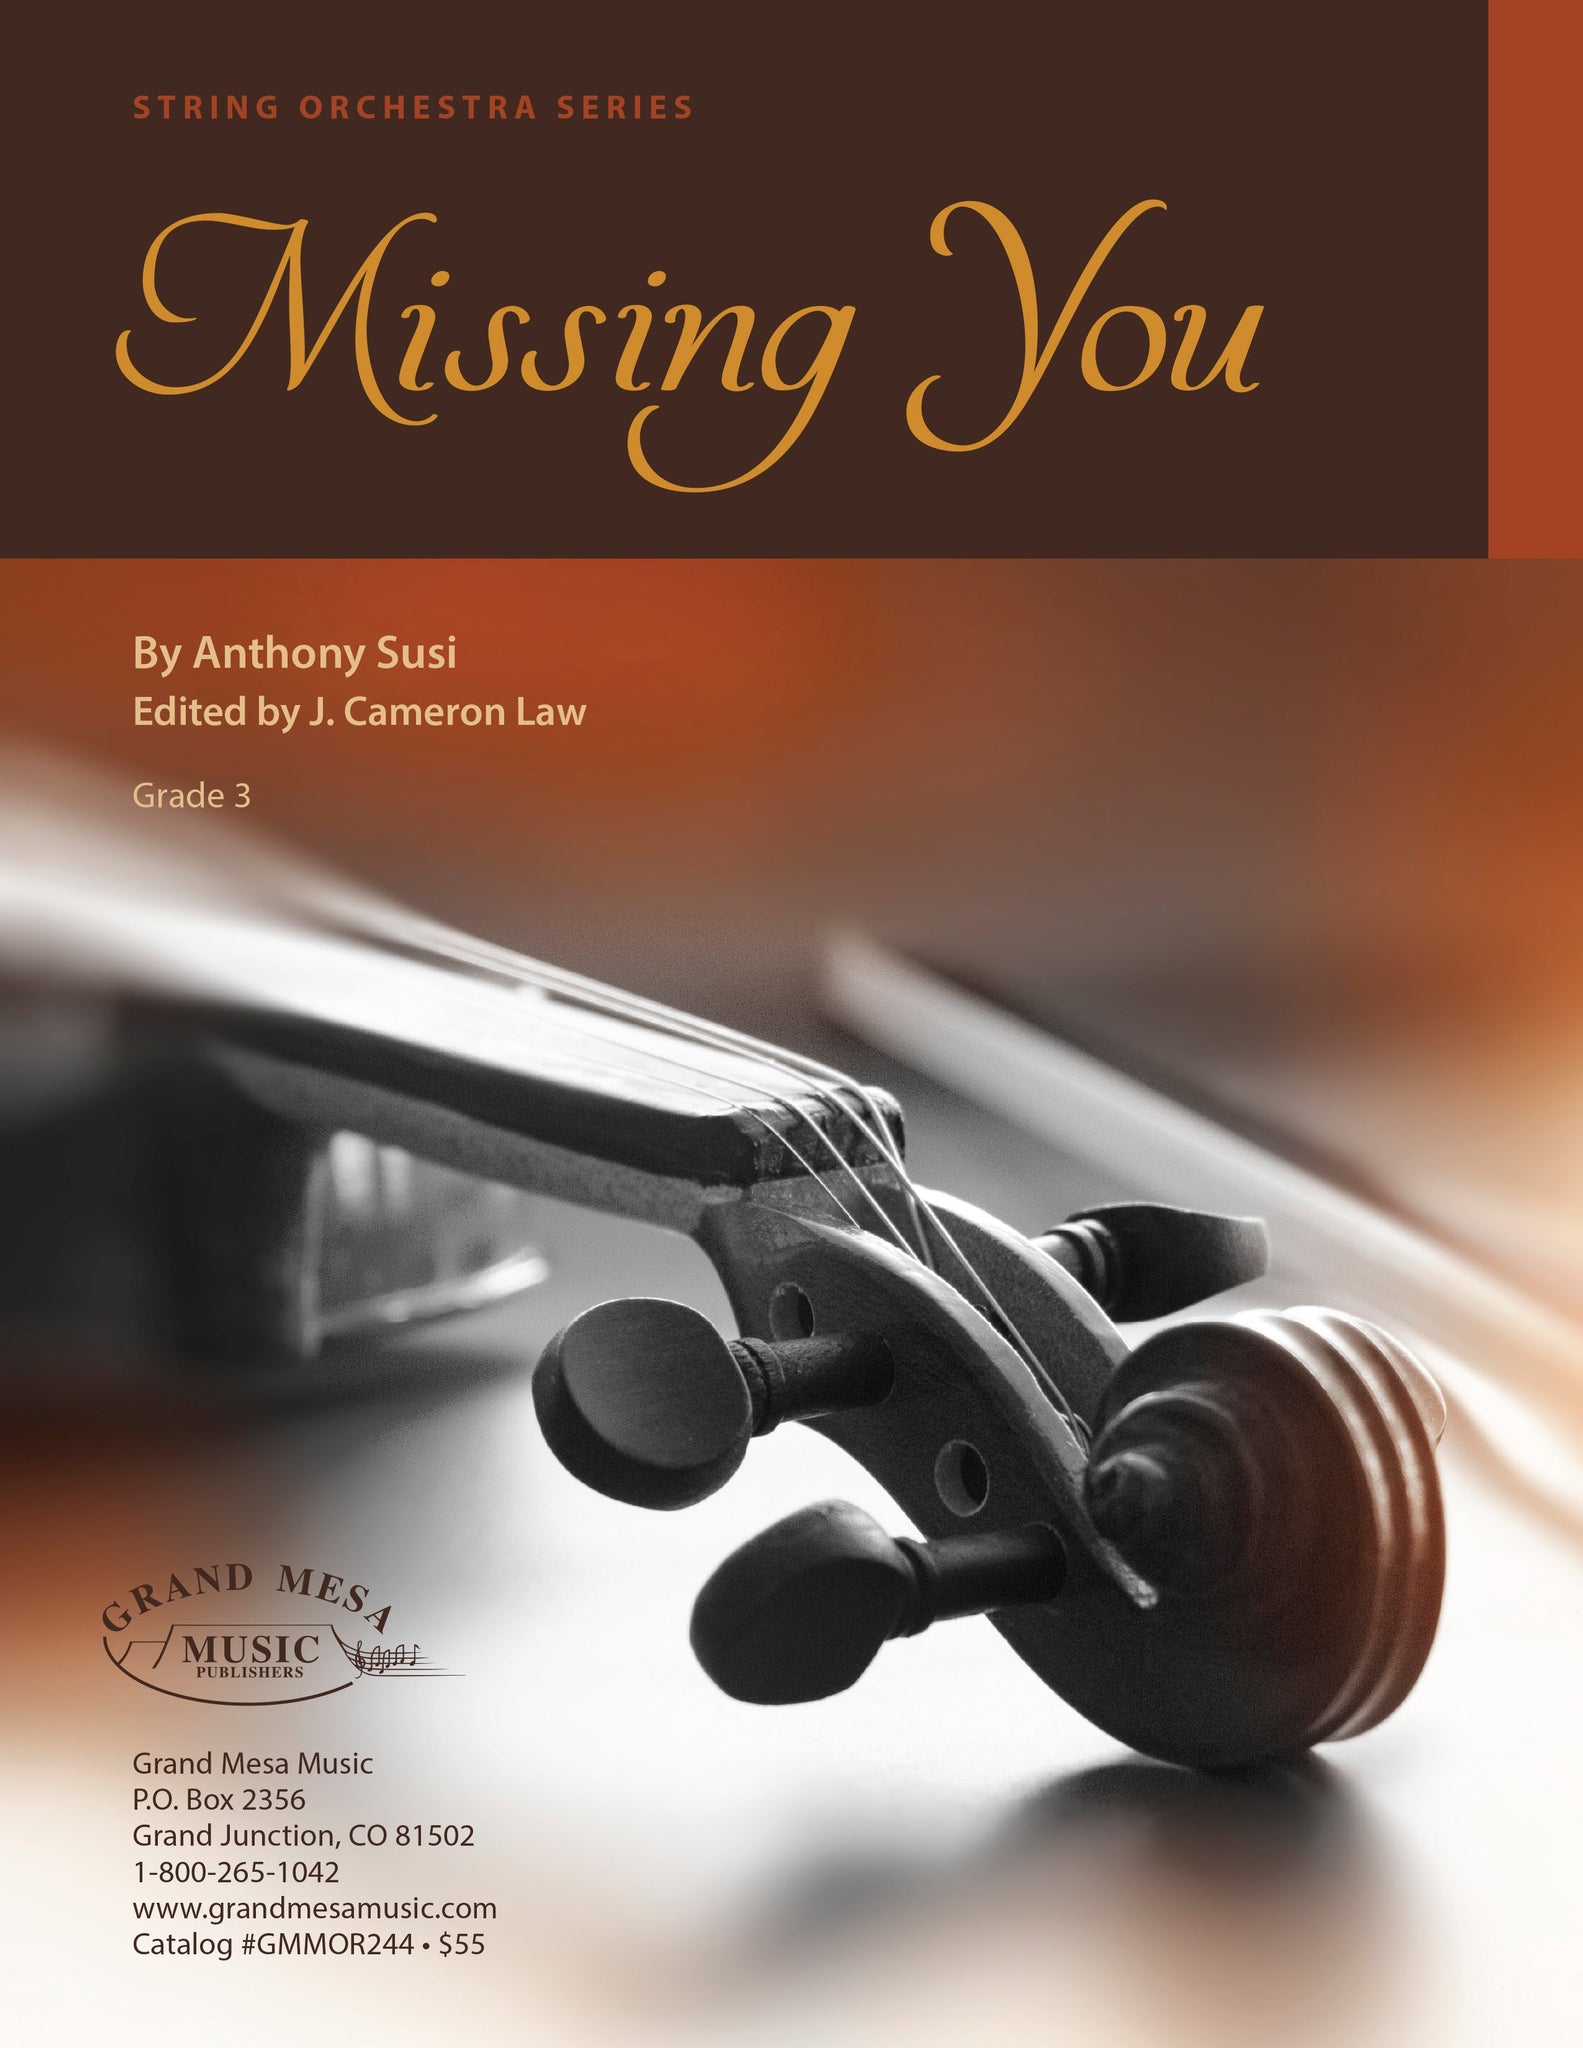 Strings sheet music cover of Missing You, composed by Anthony Susi.